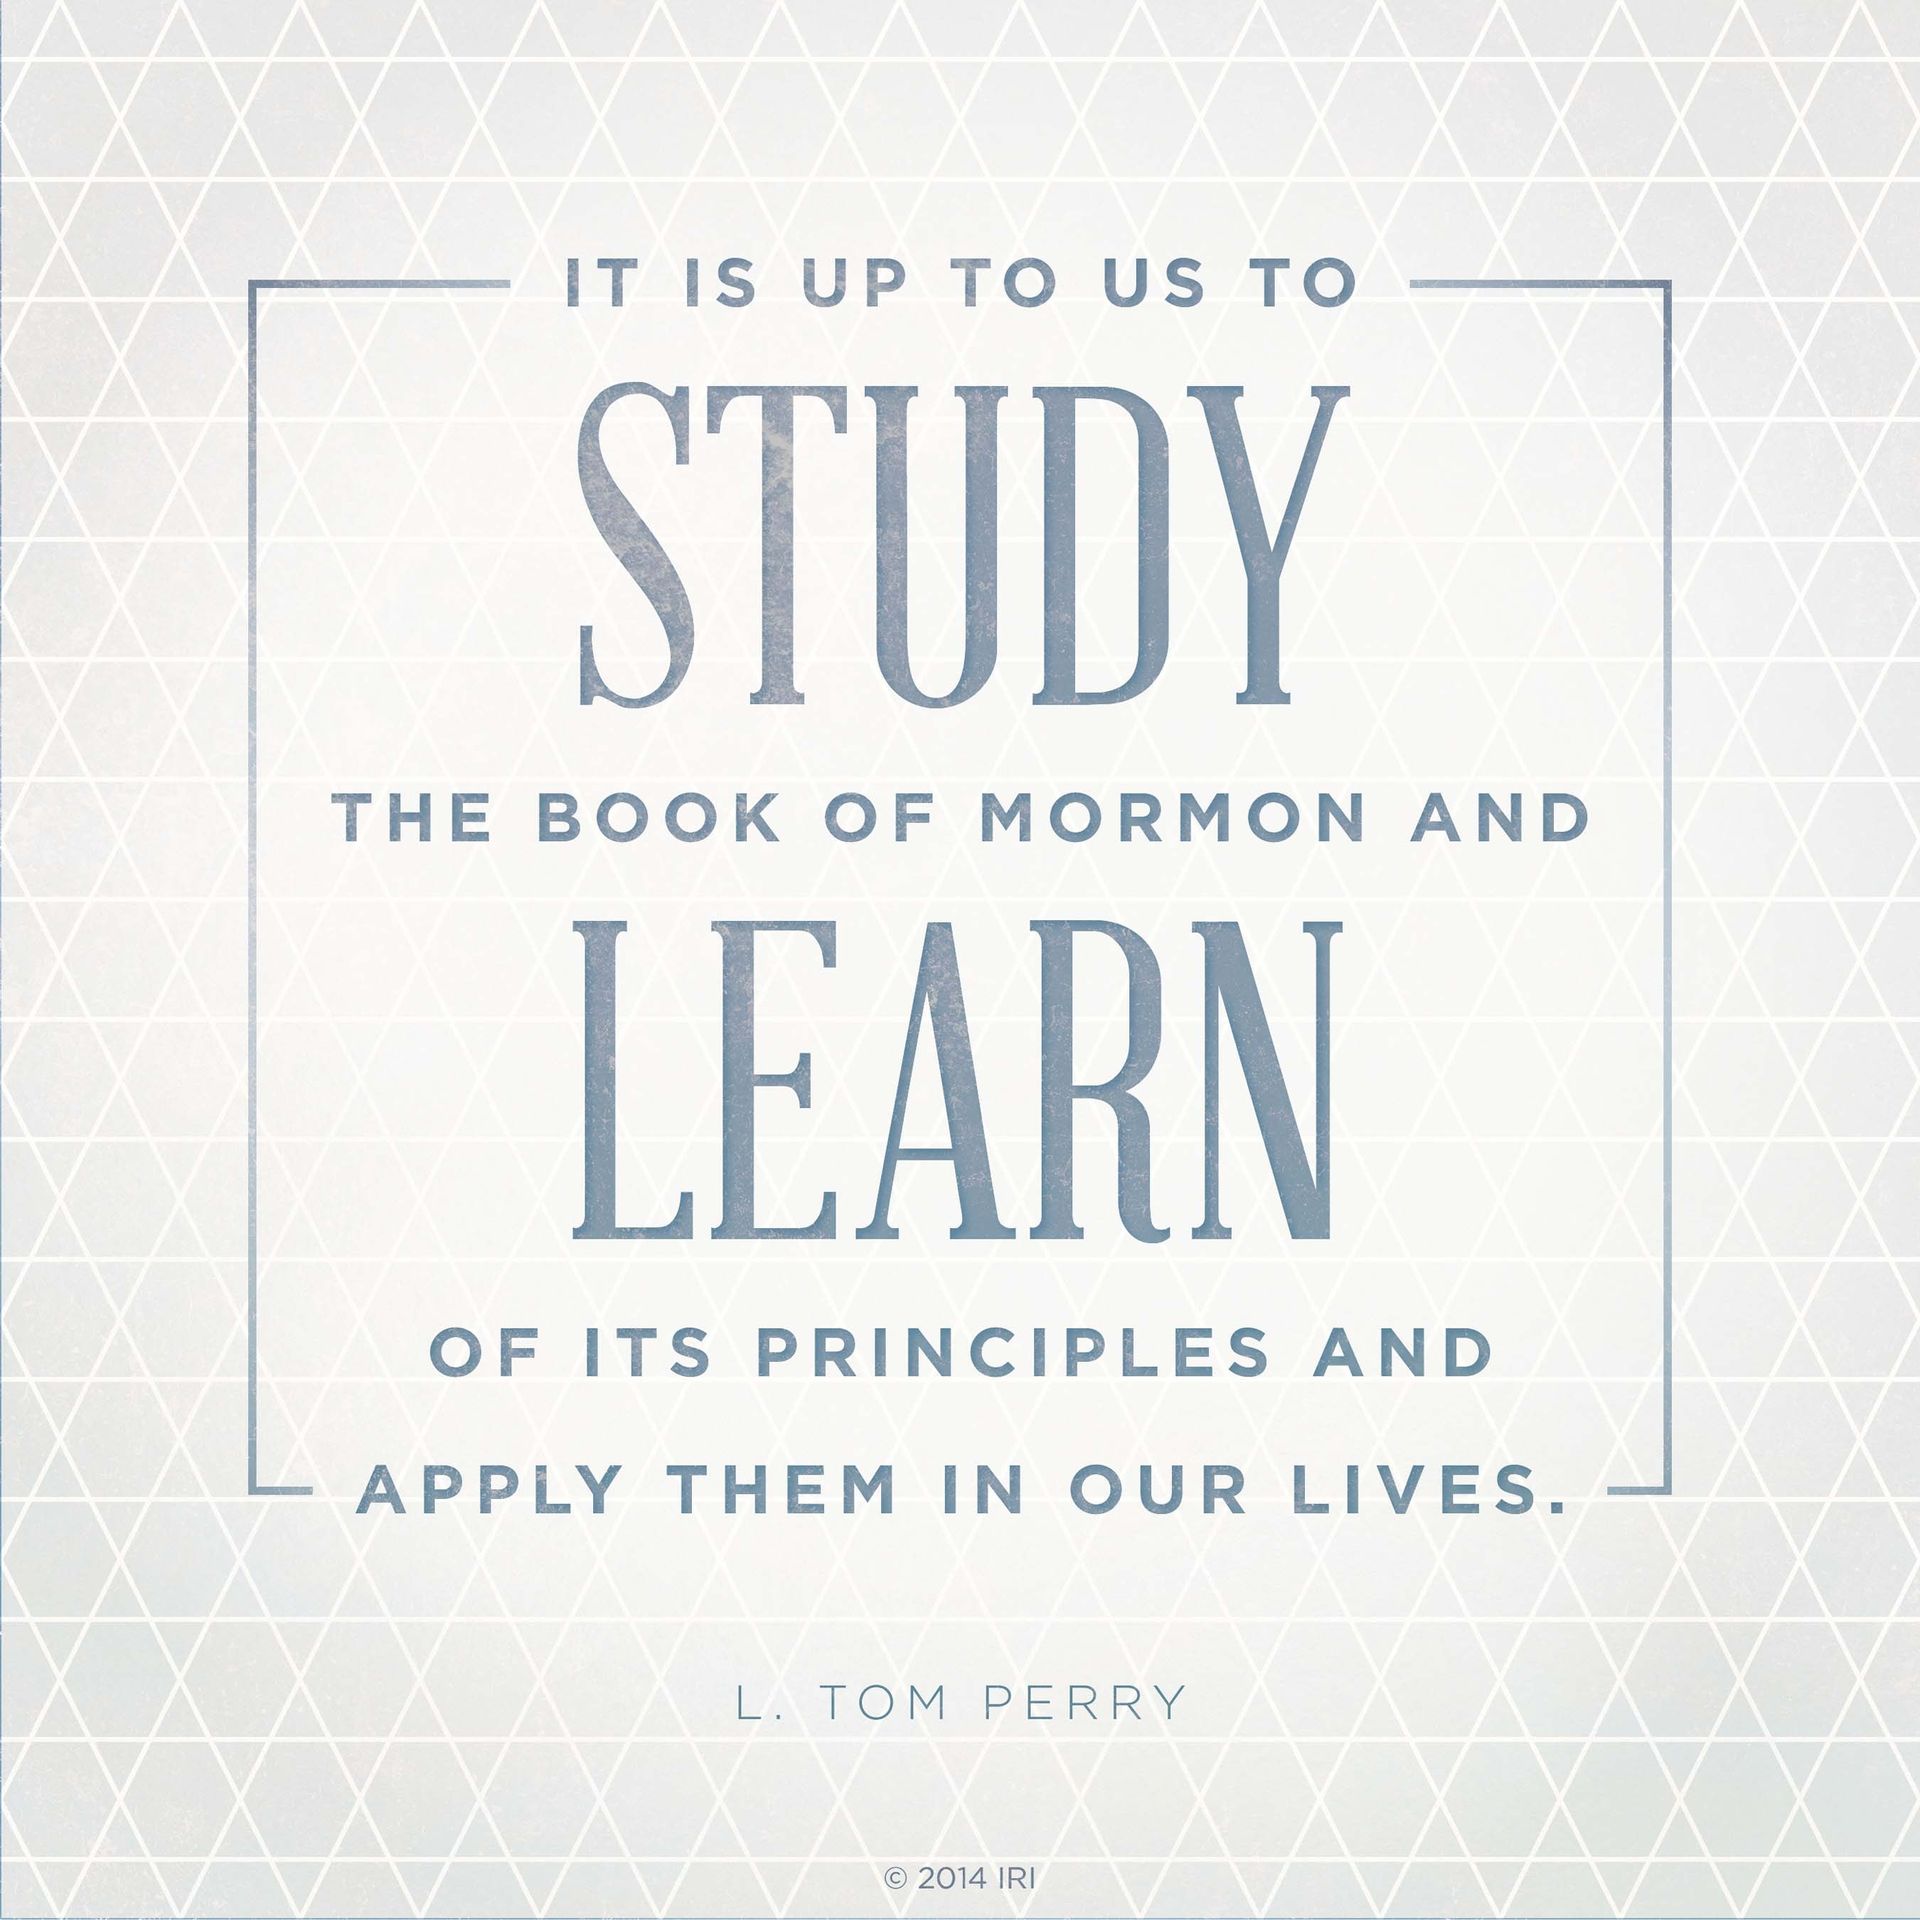 “It is up to us to study the Book of Mormon and learn of its principles and apply them in our lives.”—Elder L. Tom Perry, “Blessings Resulting from Reading the Book of Mormon”